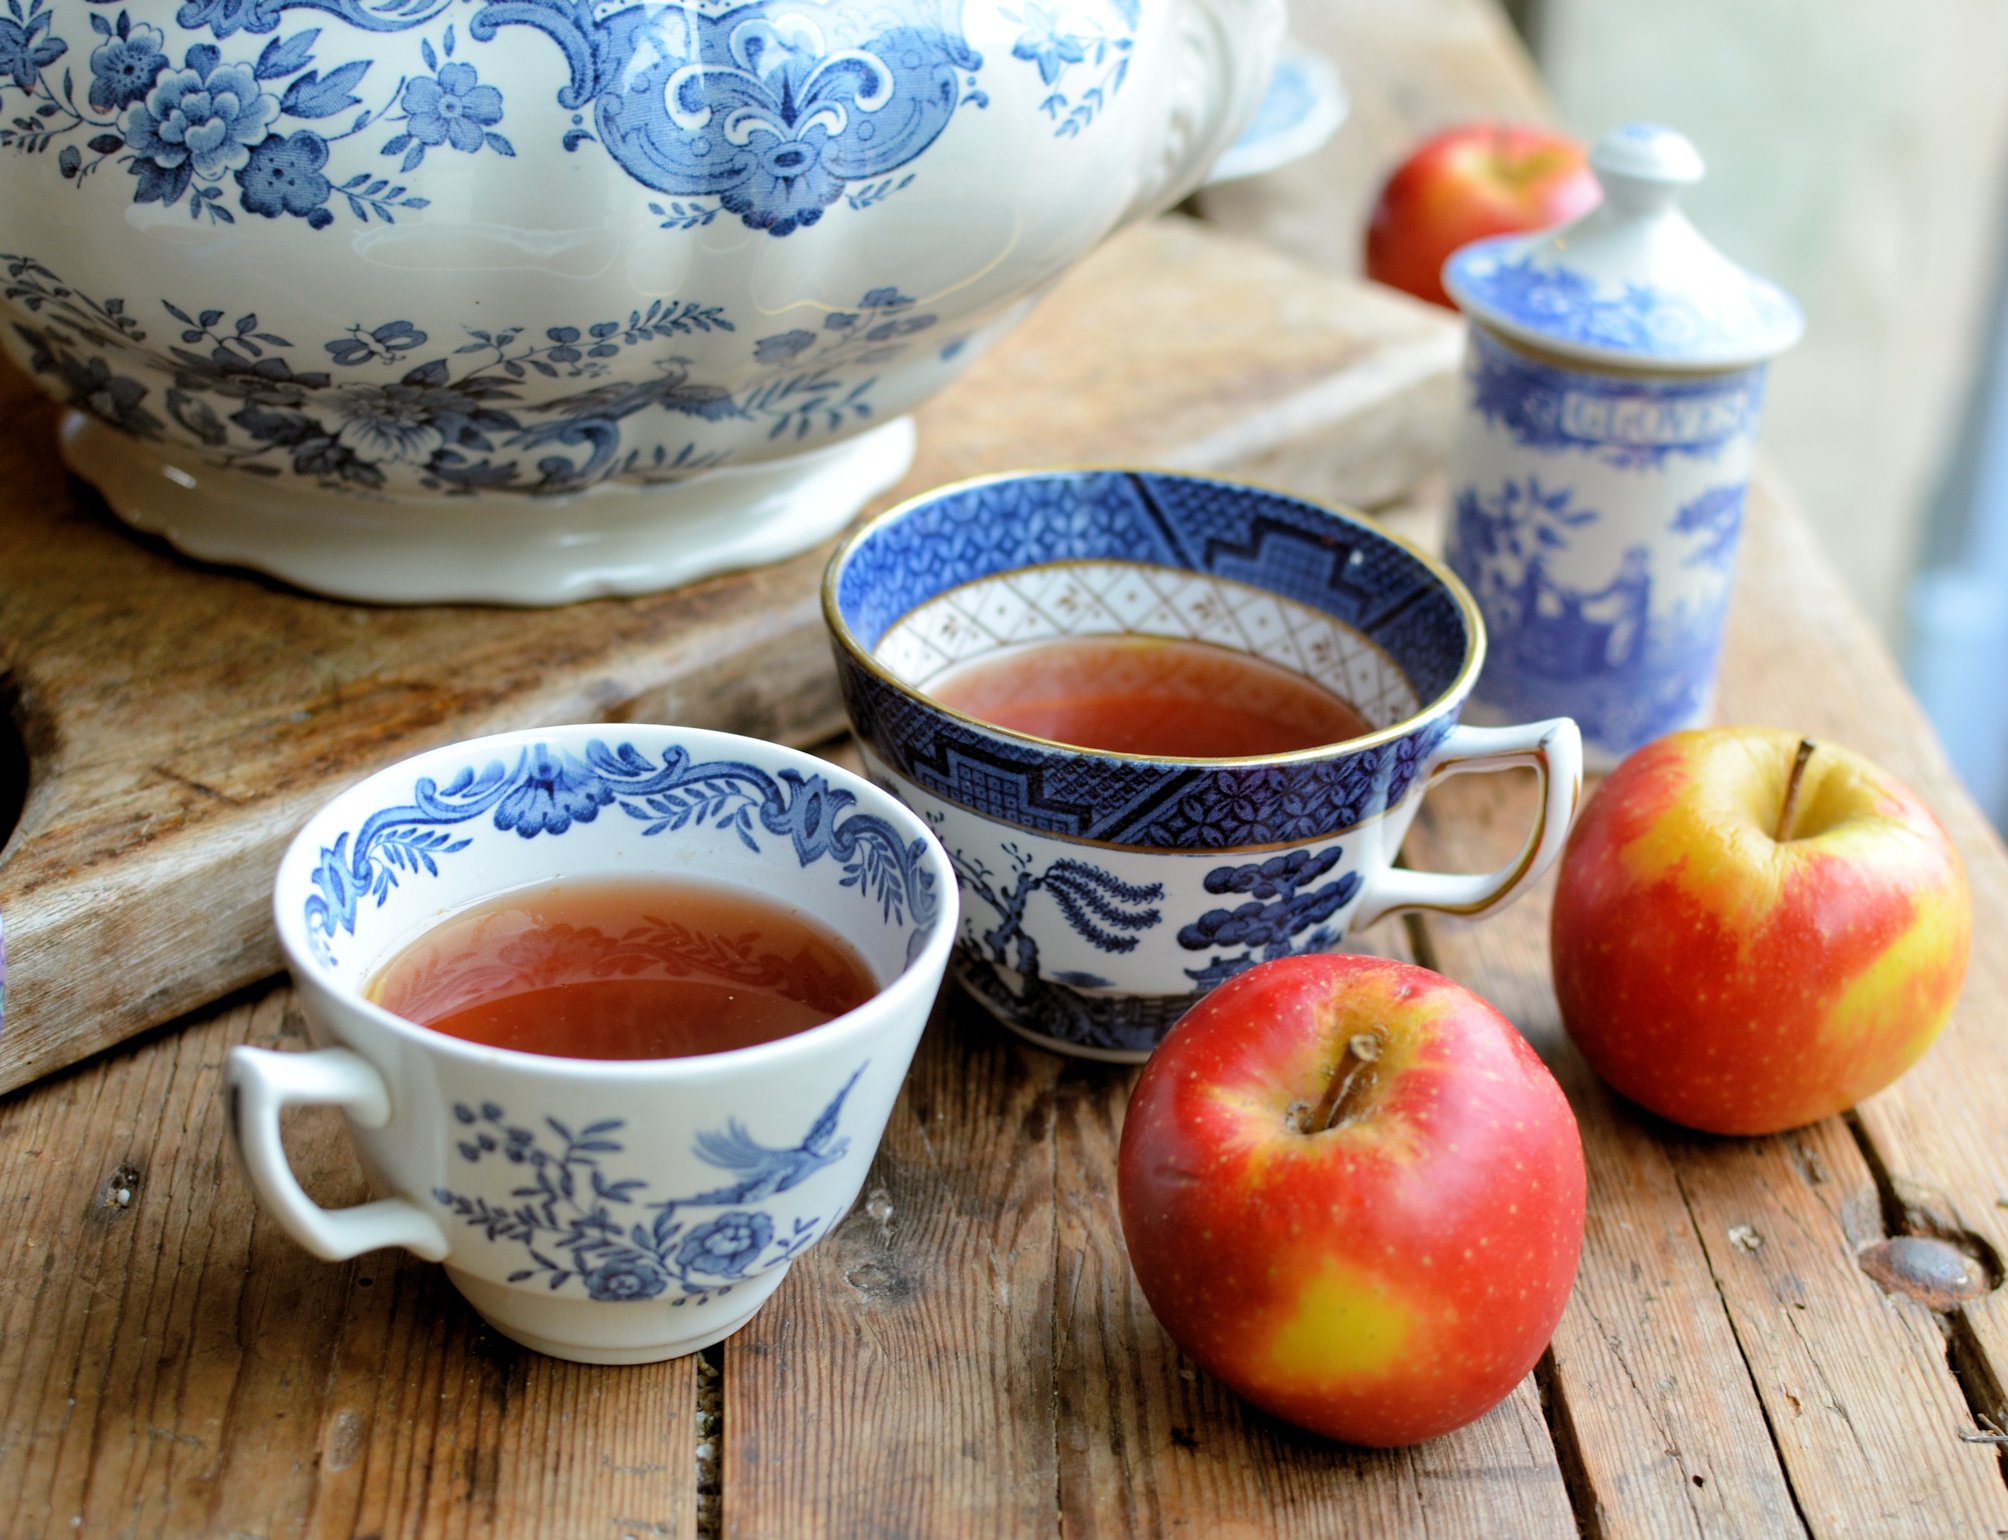 Twelfth Night, Apples and Wassailing A Traditional English Wassail Recipe